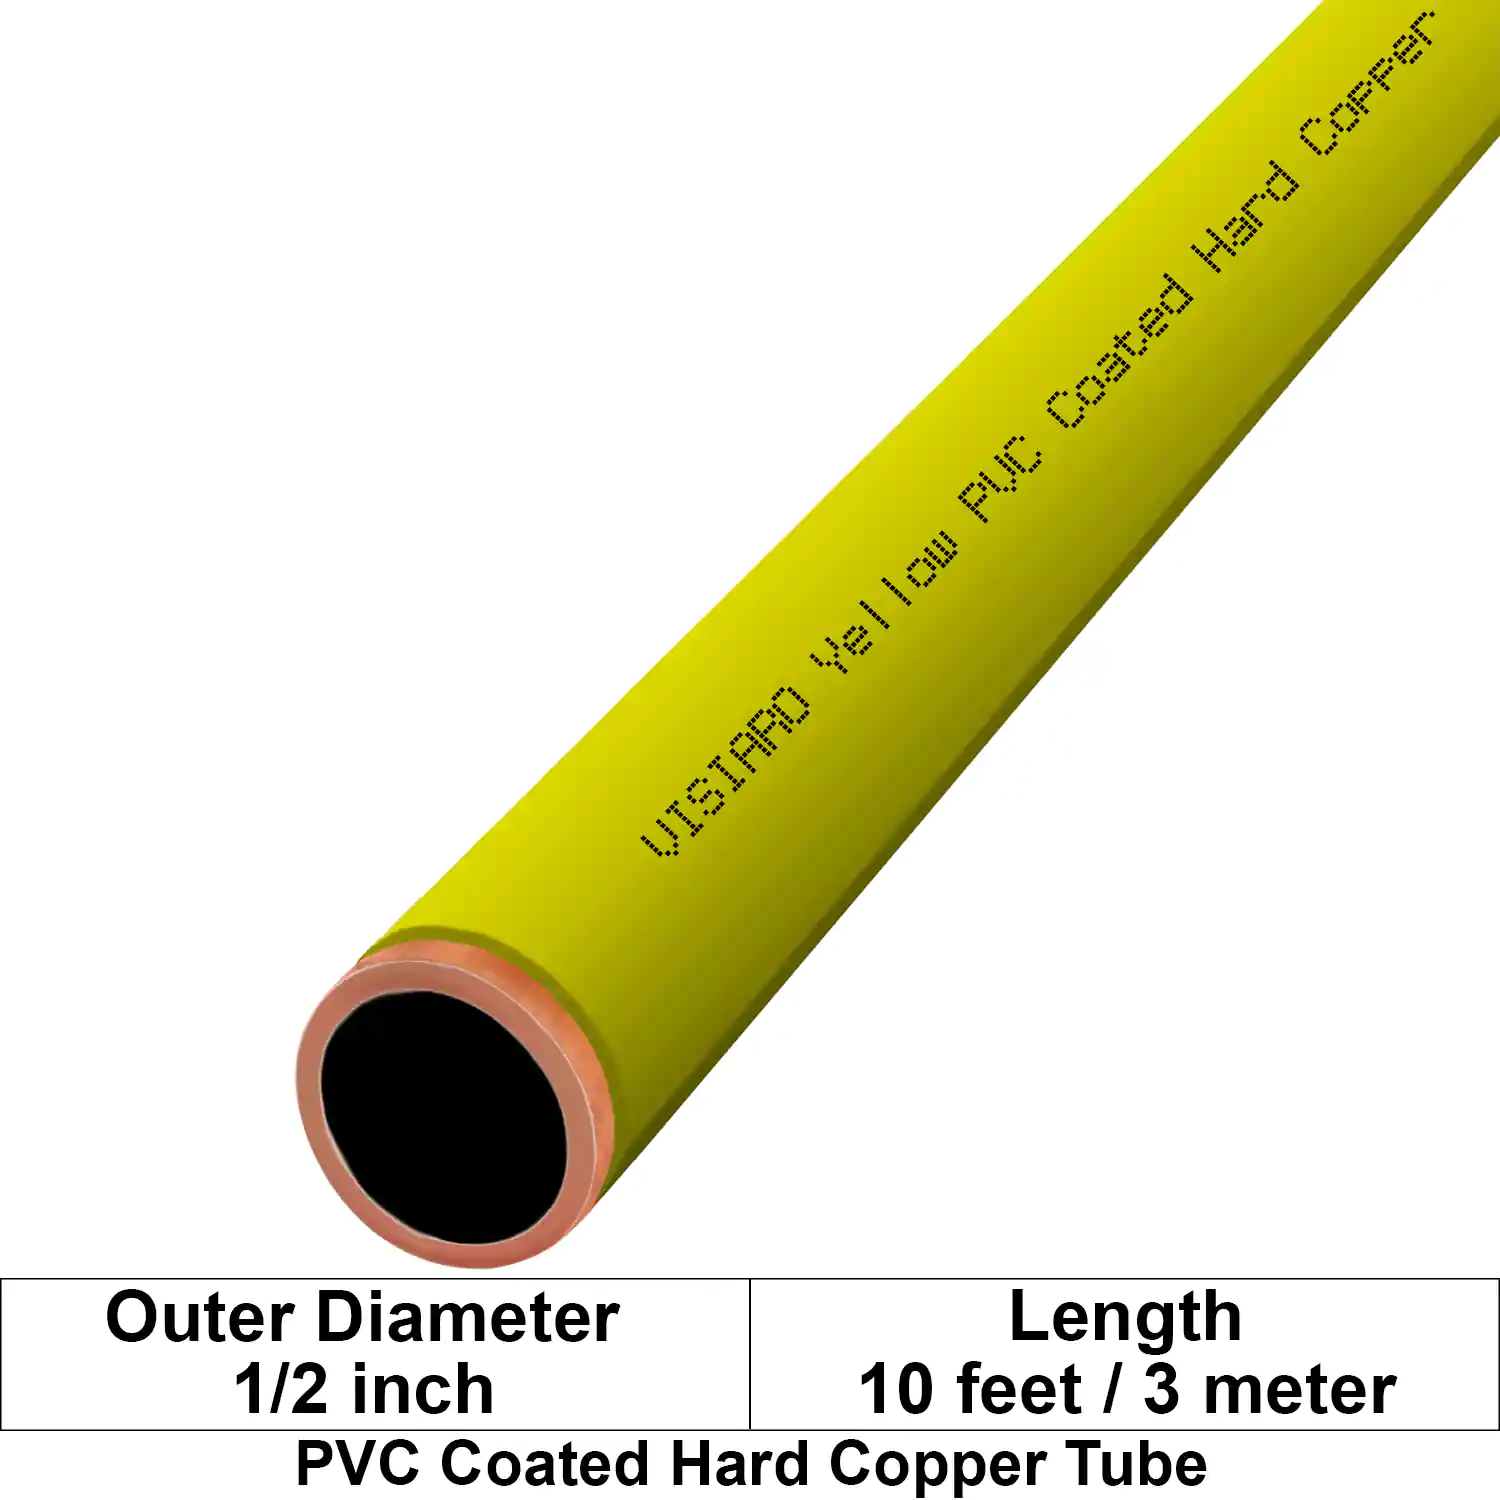 Visiaro Yellow PVC Coated Hard Copper Tube 10ft long Outer Diameter - 1/2 inch